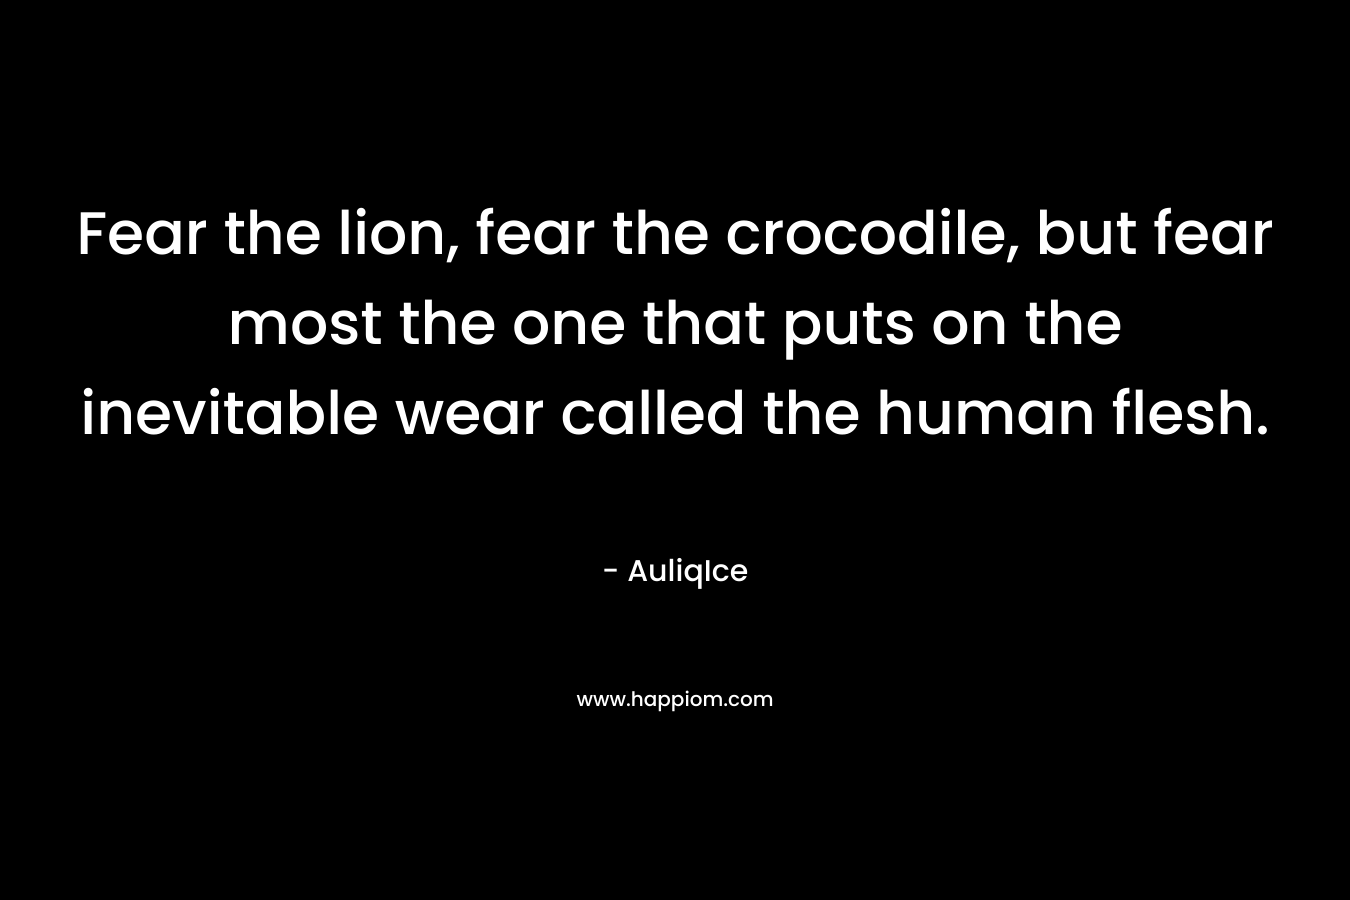 Fear the lion, fear the crocodile, but fear most the one that puts on the inevitable wear called the human flesh. – AuliqIce